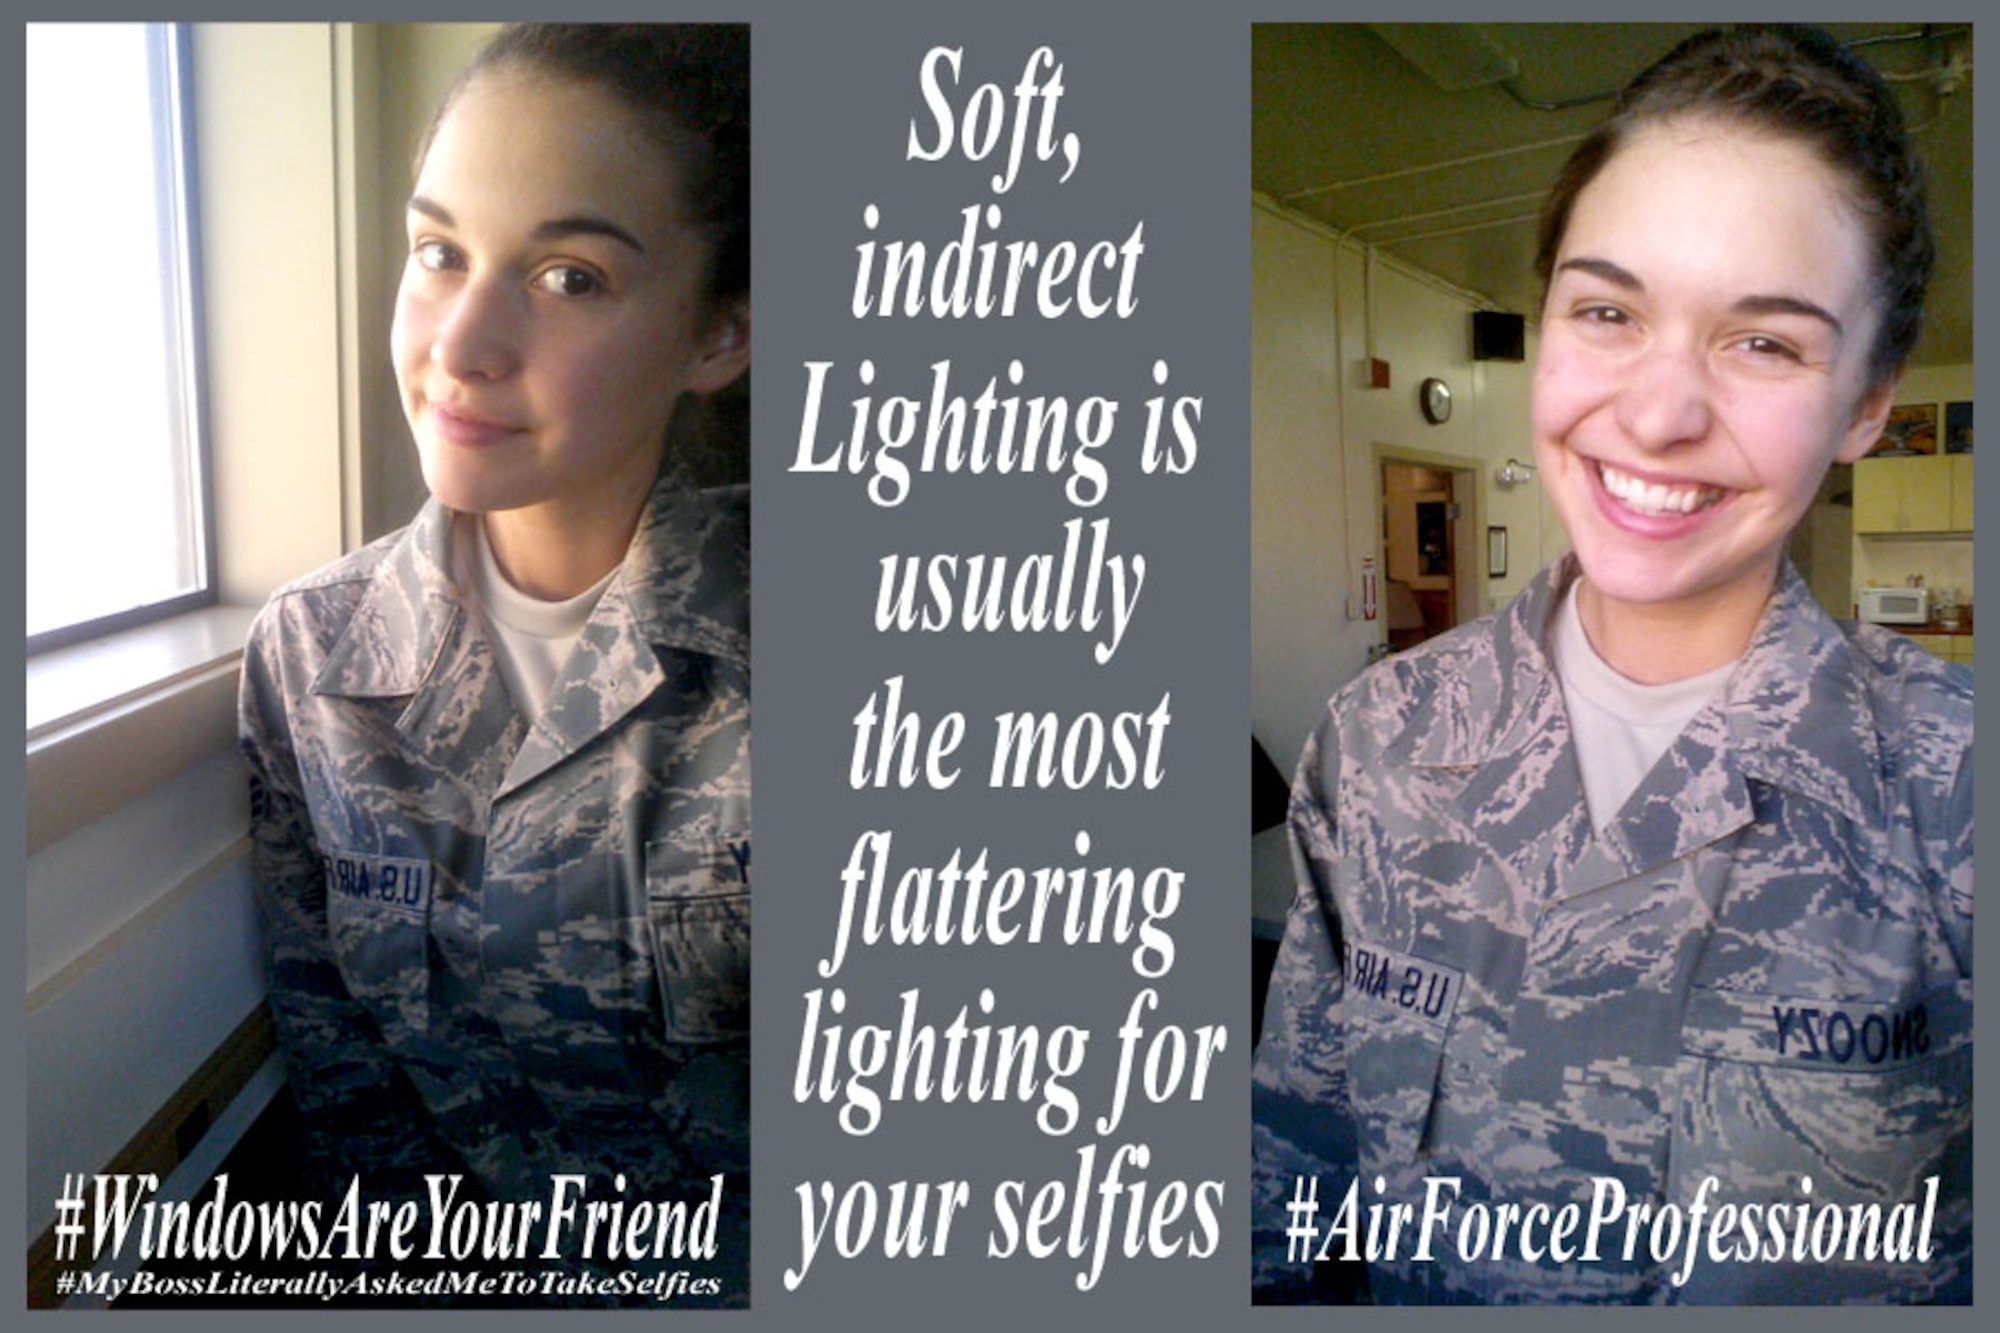 U.S. Air Force Senior Airmen Penny Snoozy poses in selfies to demonstrate how natural and soft lighting can improve photograph quality at Kingsley Field, Ore. March 2, 2015.  Snoozy offers tips to keep Airmen professional in their social media endeavors to positively influence community opinion.  (U.S. Air National Guard photo illustration by Senior Airman Penny Snoozy/released)